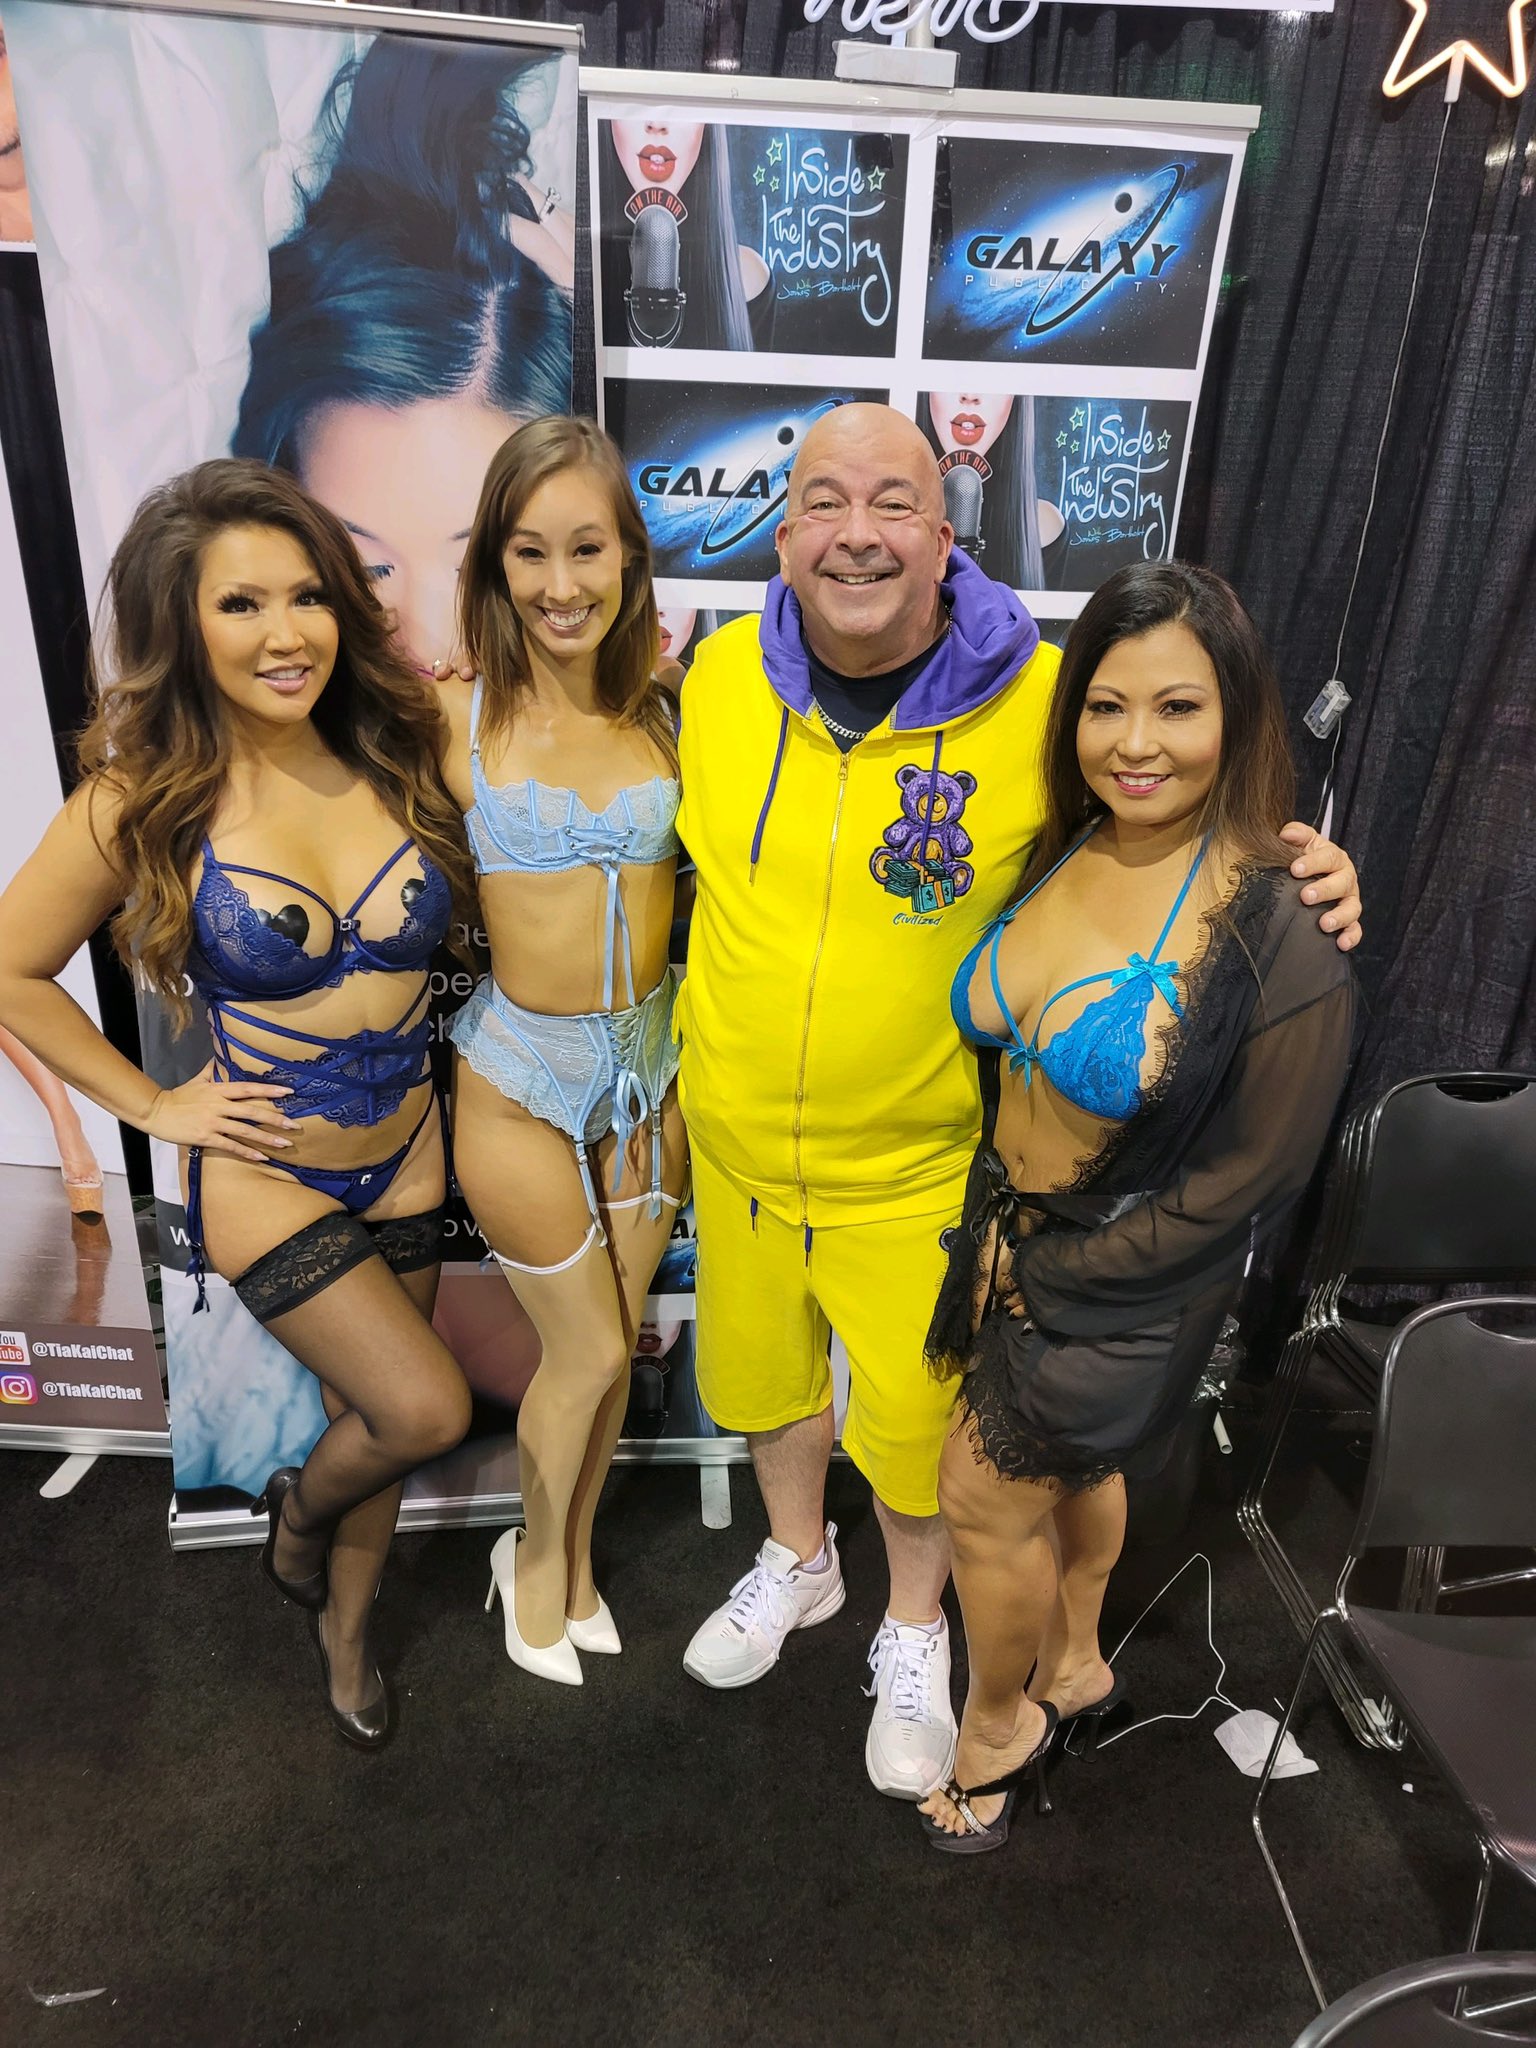 Pictures from Exxxotica Chicago 2021 Galaxy Publicity